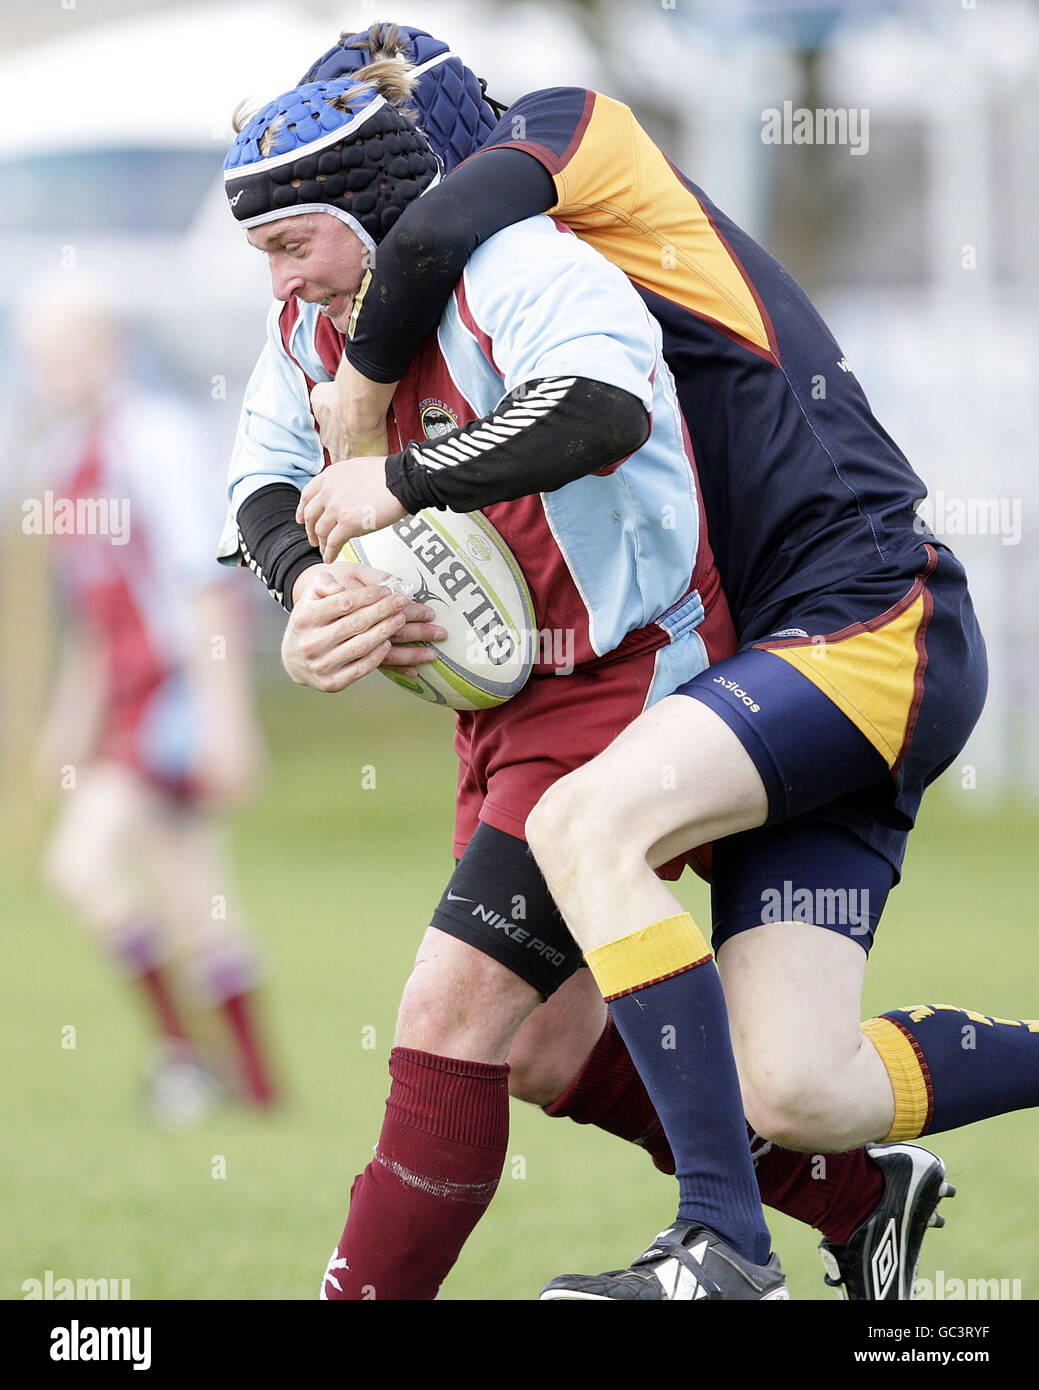 Rugby Union - Scottish Hydro East - St Boswells v Queensferry - St Boswells. St Boswells' Scott Elliot (left) is tackled by Queensferry's Simon Bowers in the Scottish Hydro East 2 match at St Boswells, Melrose. Stock Photo